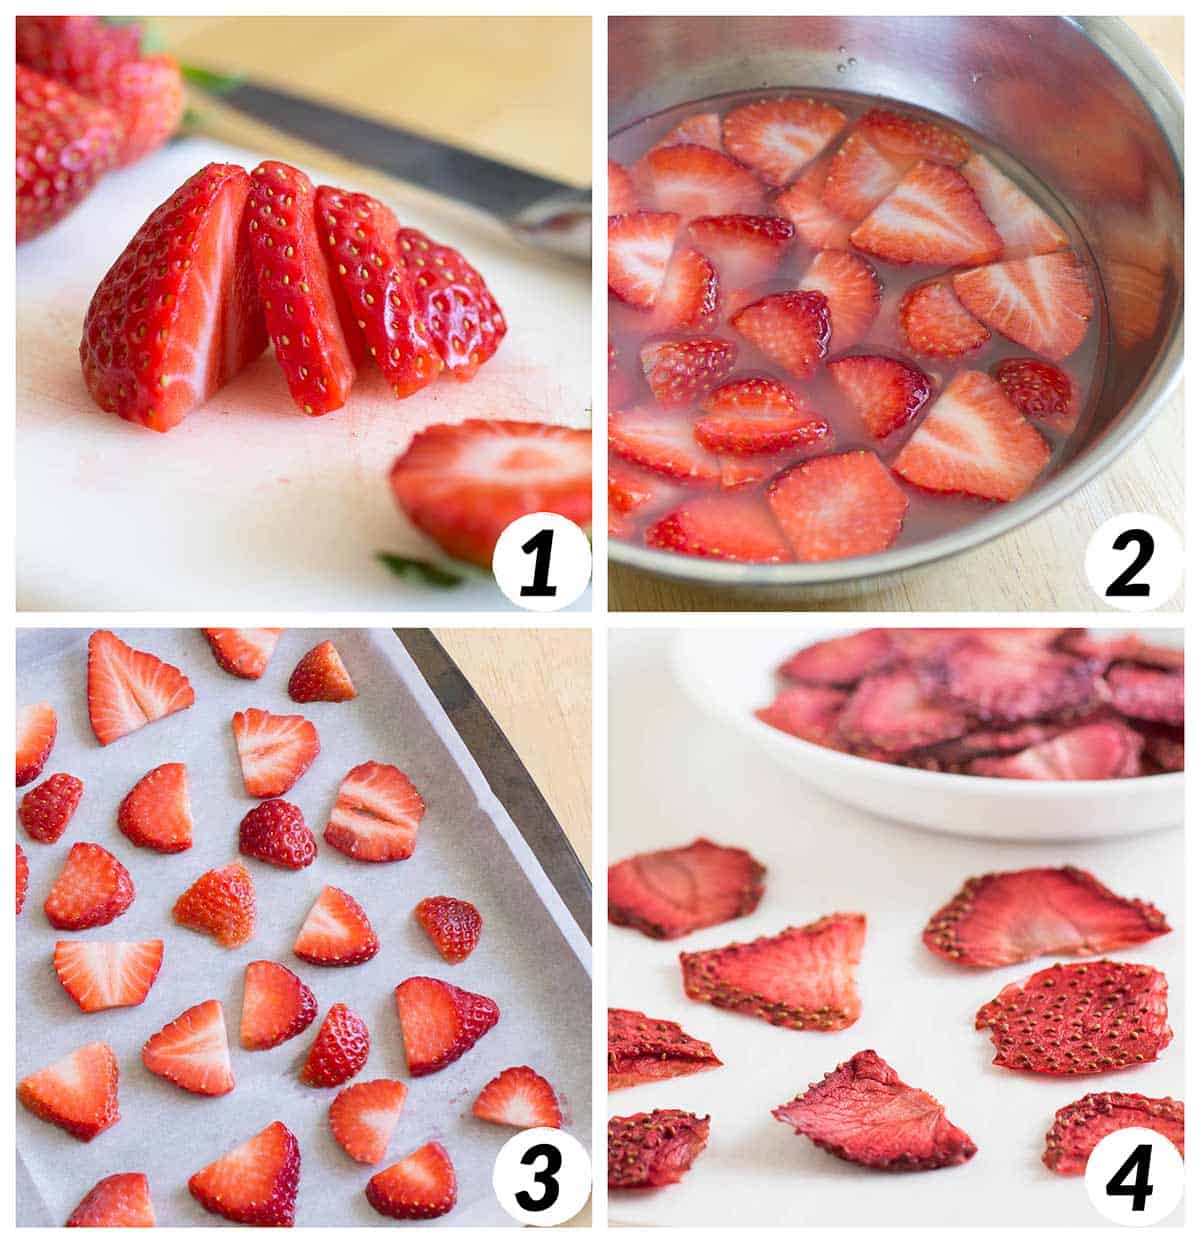 Four panel grid of process shots for dried strawberries - slicing strawberries, soaking in water, arranging on baking sheet, and dehydrating in the oven.